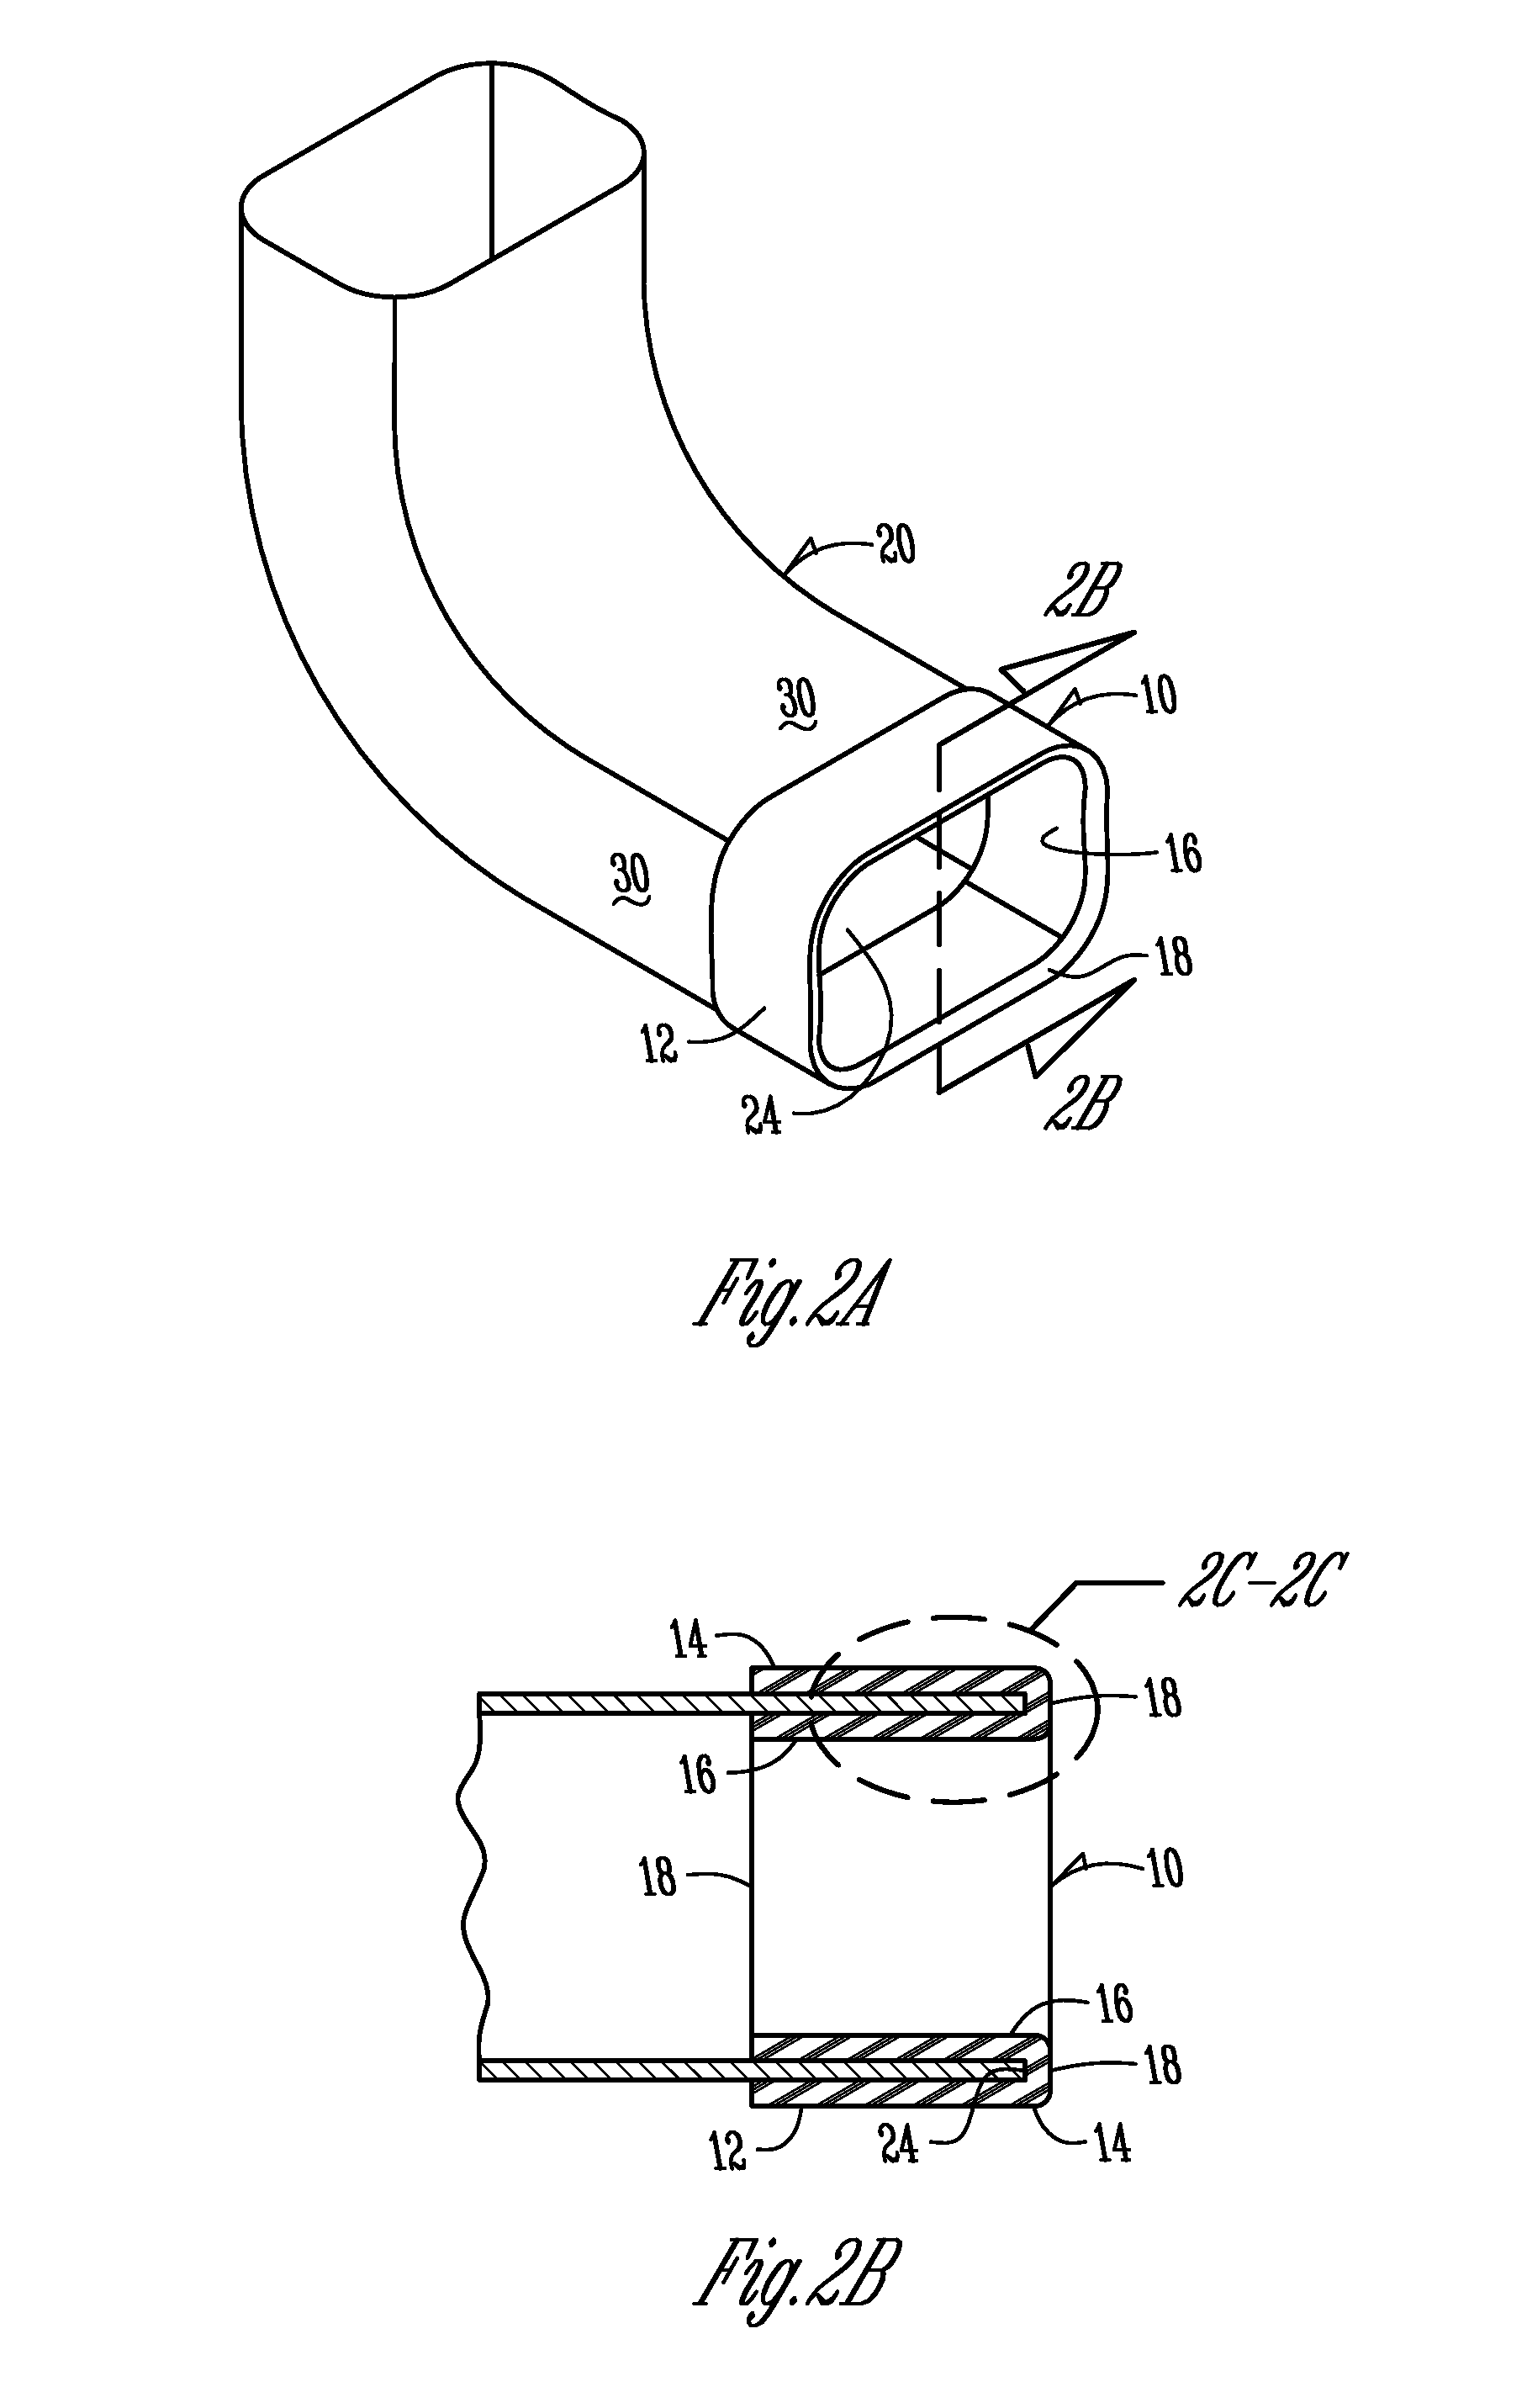 Apparatus and method for protecting a downspout of a gutter